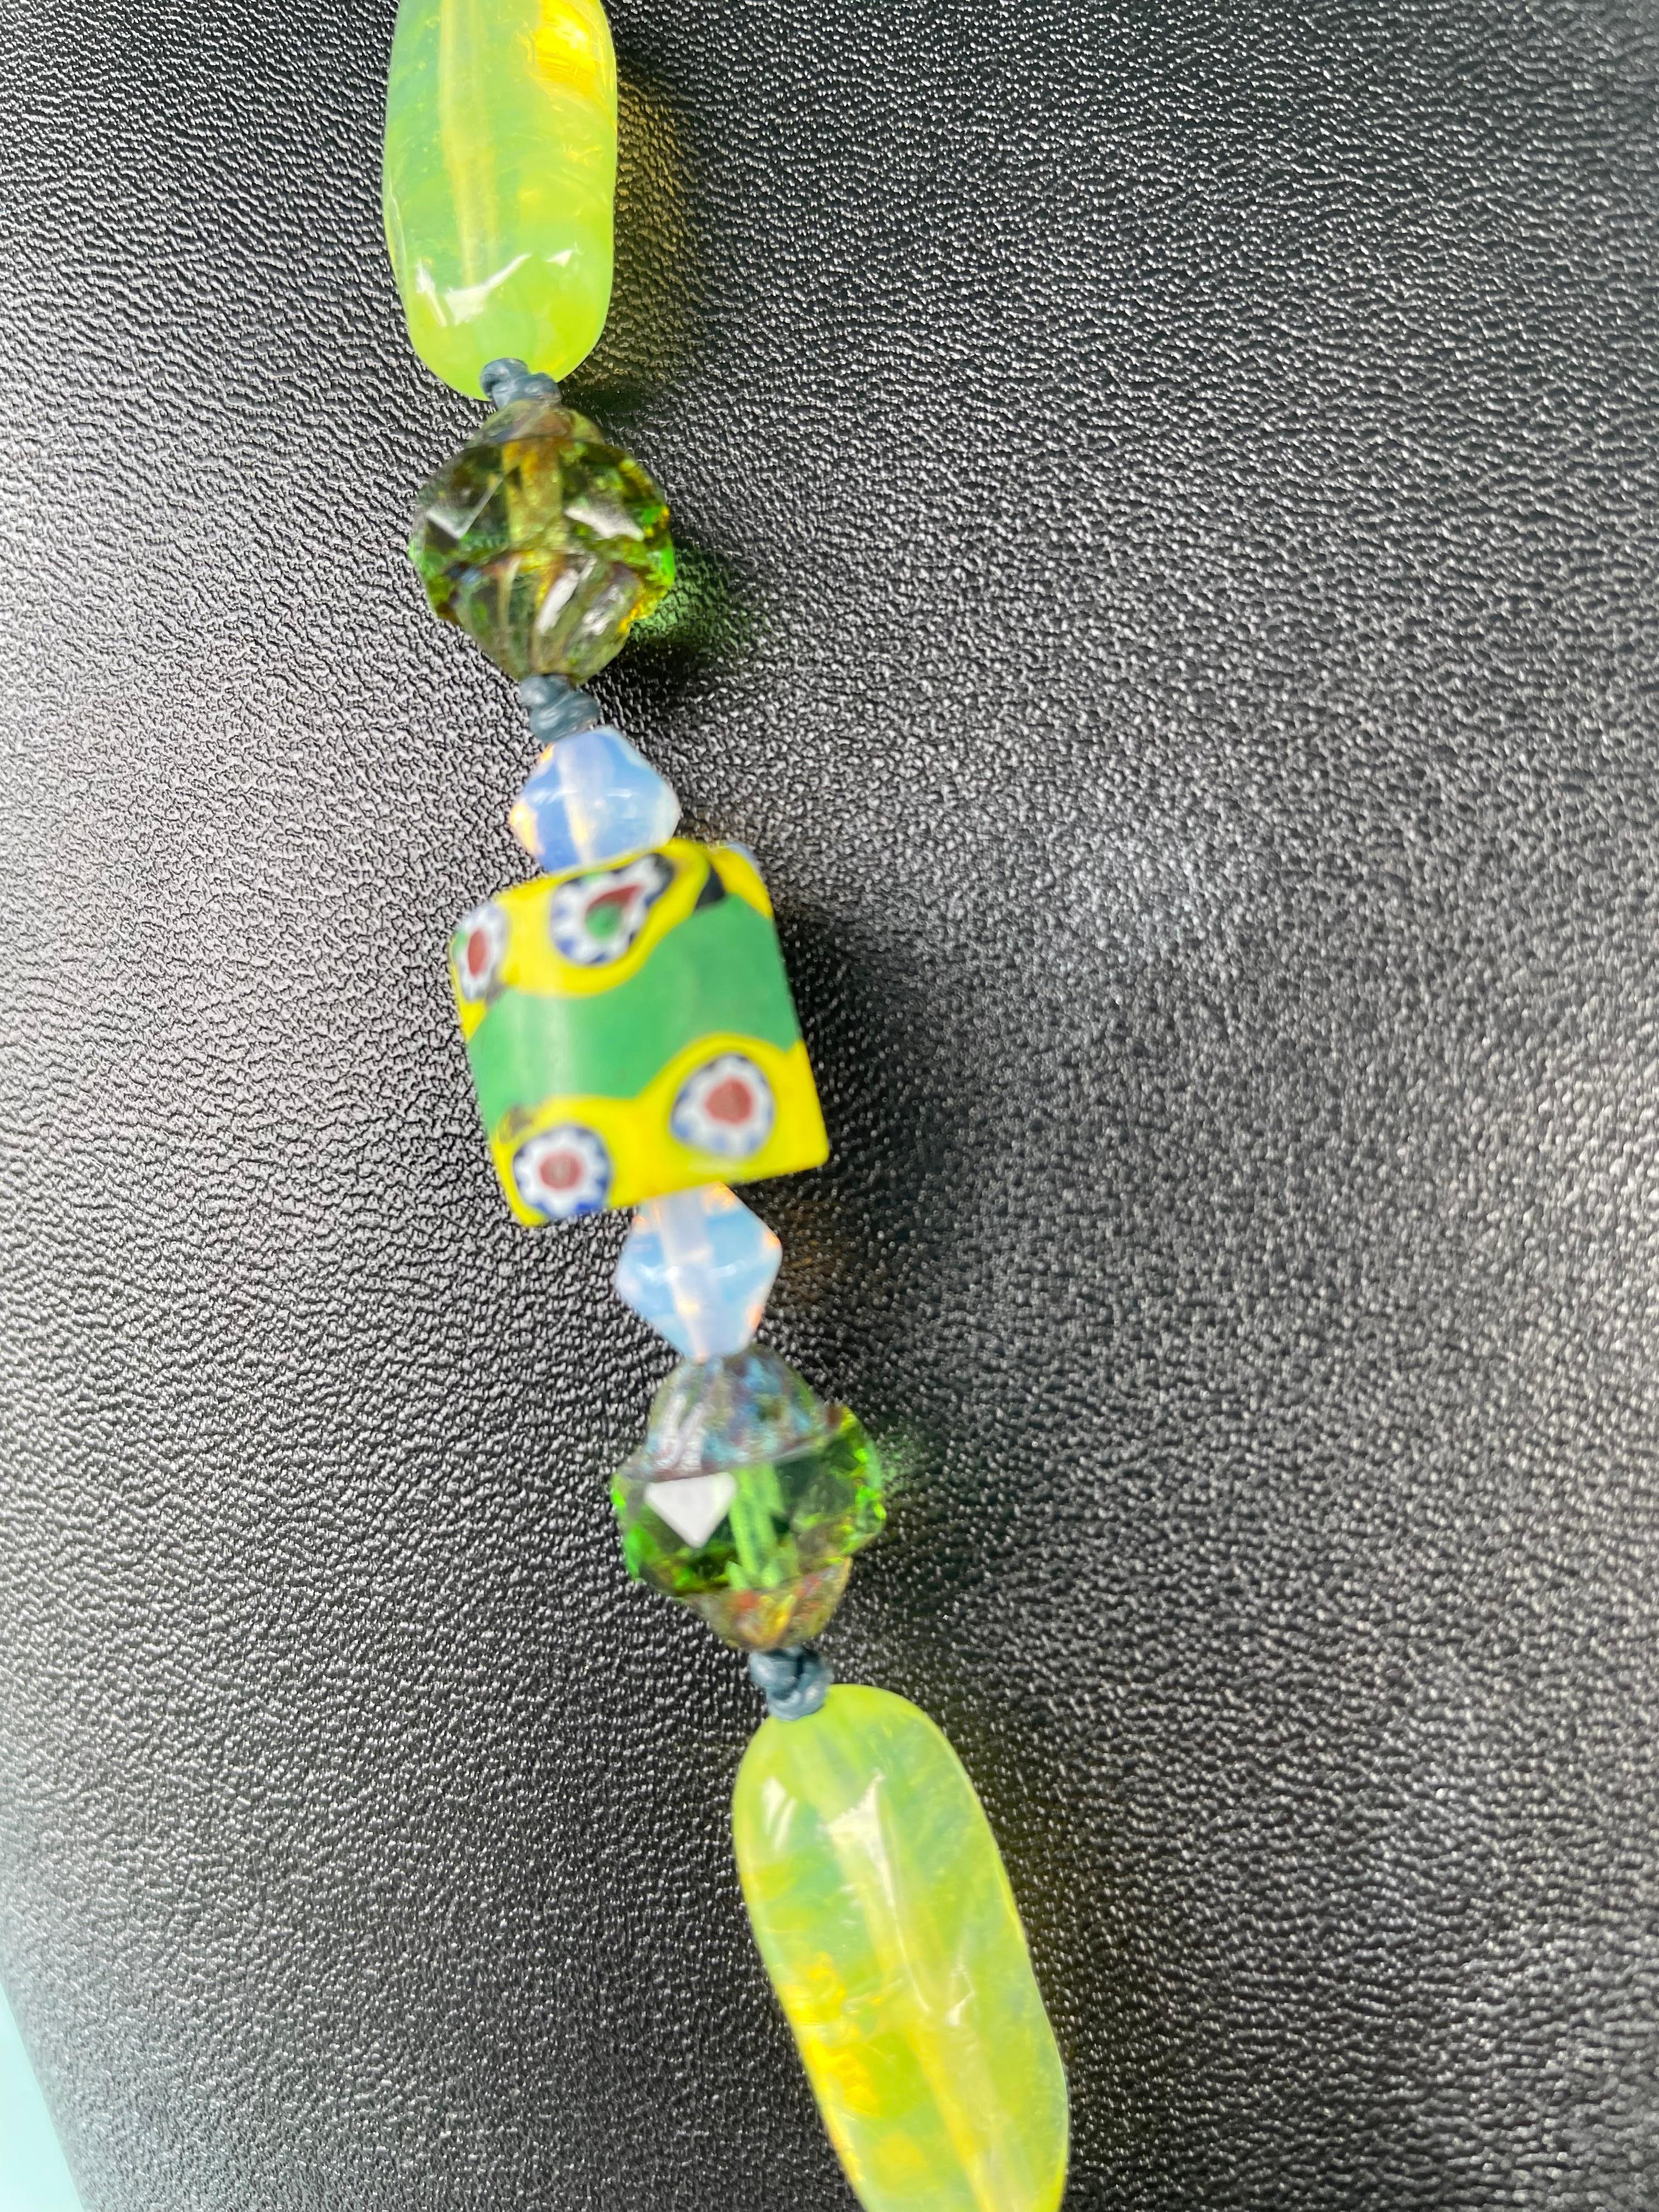 One of a kind,handmade,statement necklace is on offer from Lorraine’s Bijoux.
It consists of vintage Venetian glass trade beads,Vintage French opaline glass beads,
Vintage Czech crystal,malachite, and small glass spacer beads.A magnetic clasp is